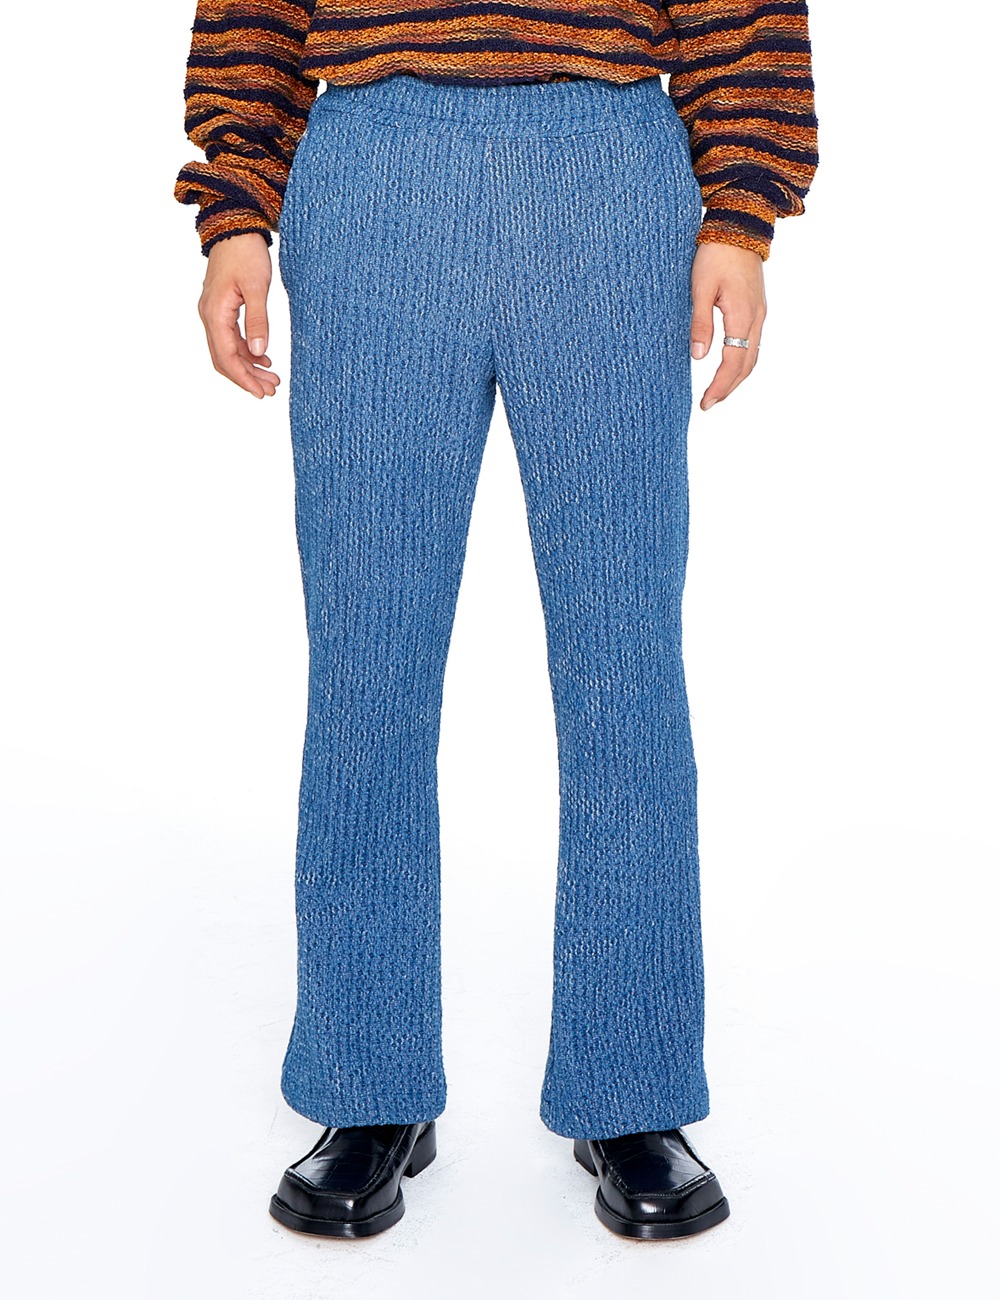 KNITTED BOOTS CUT PANTS_MID BLUE